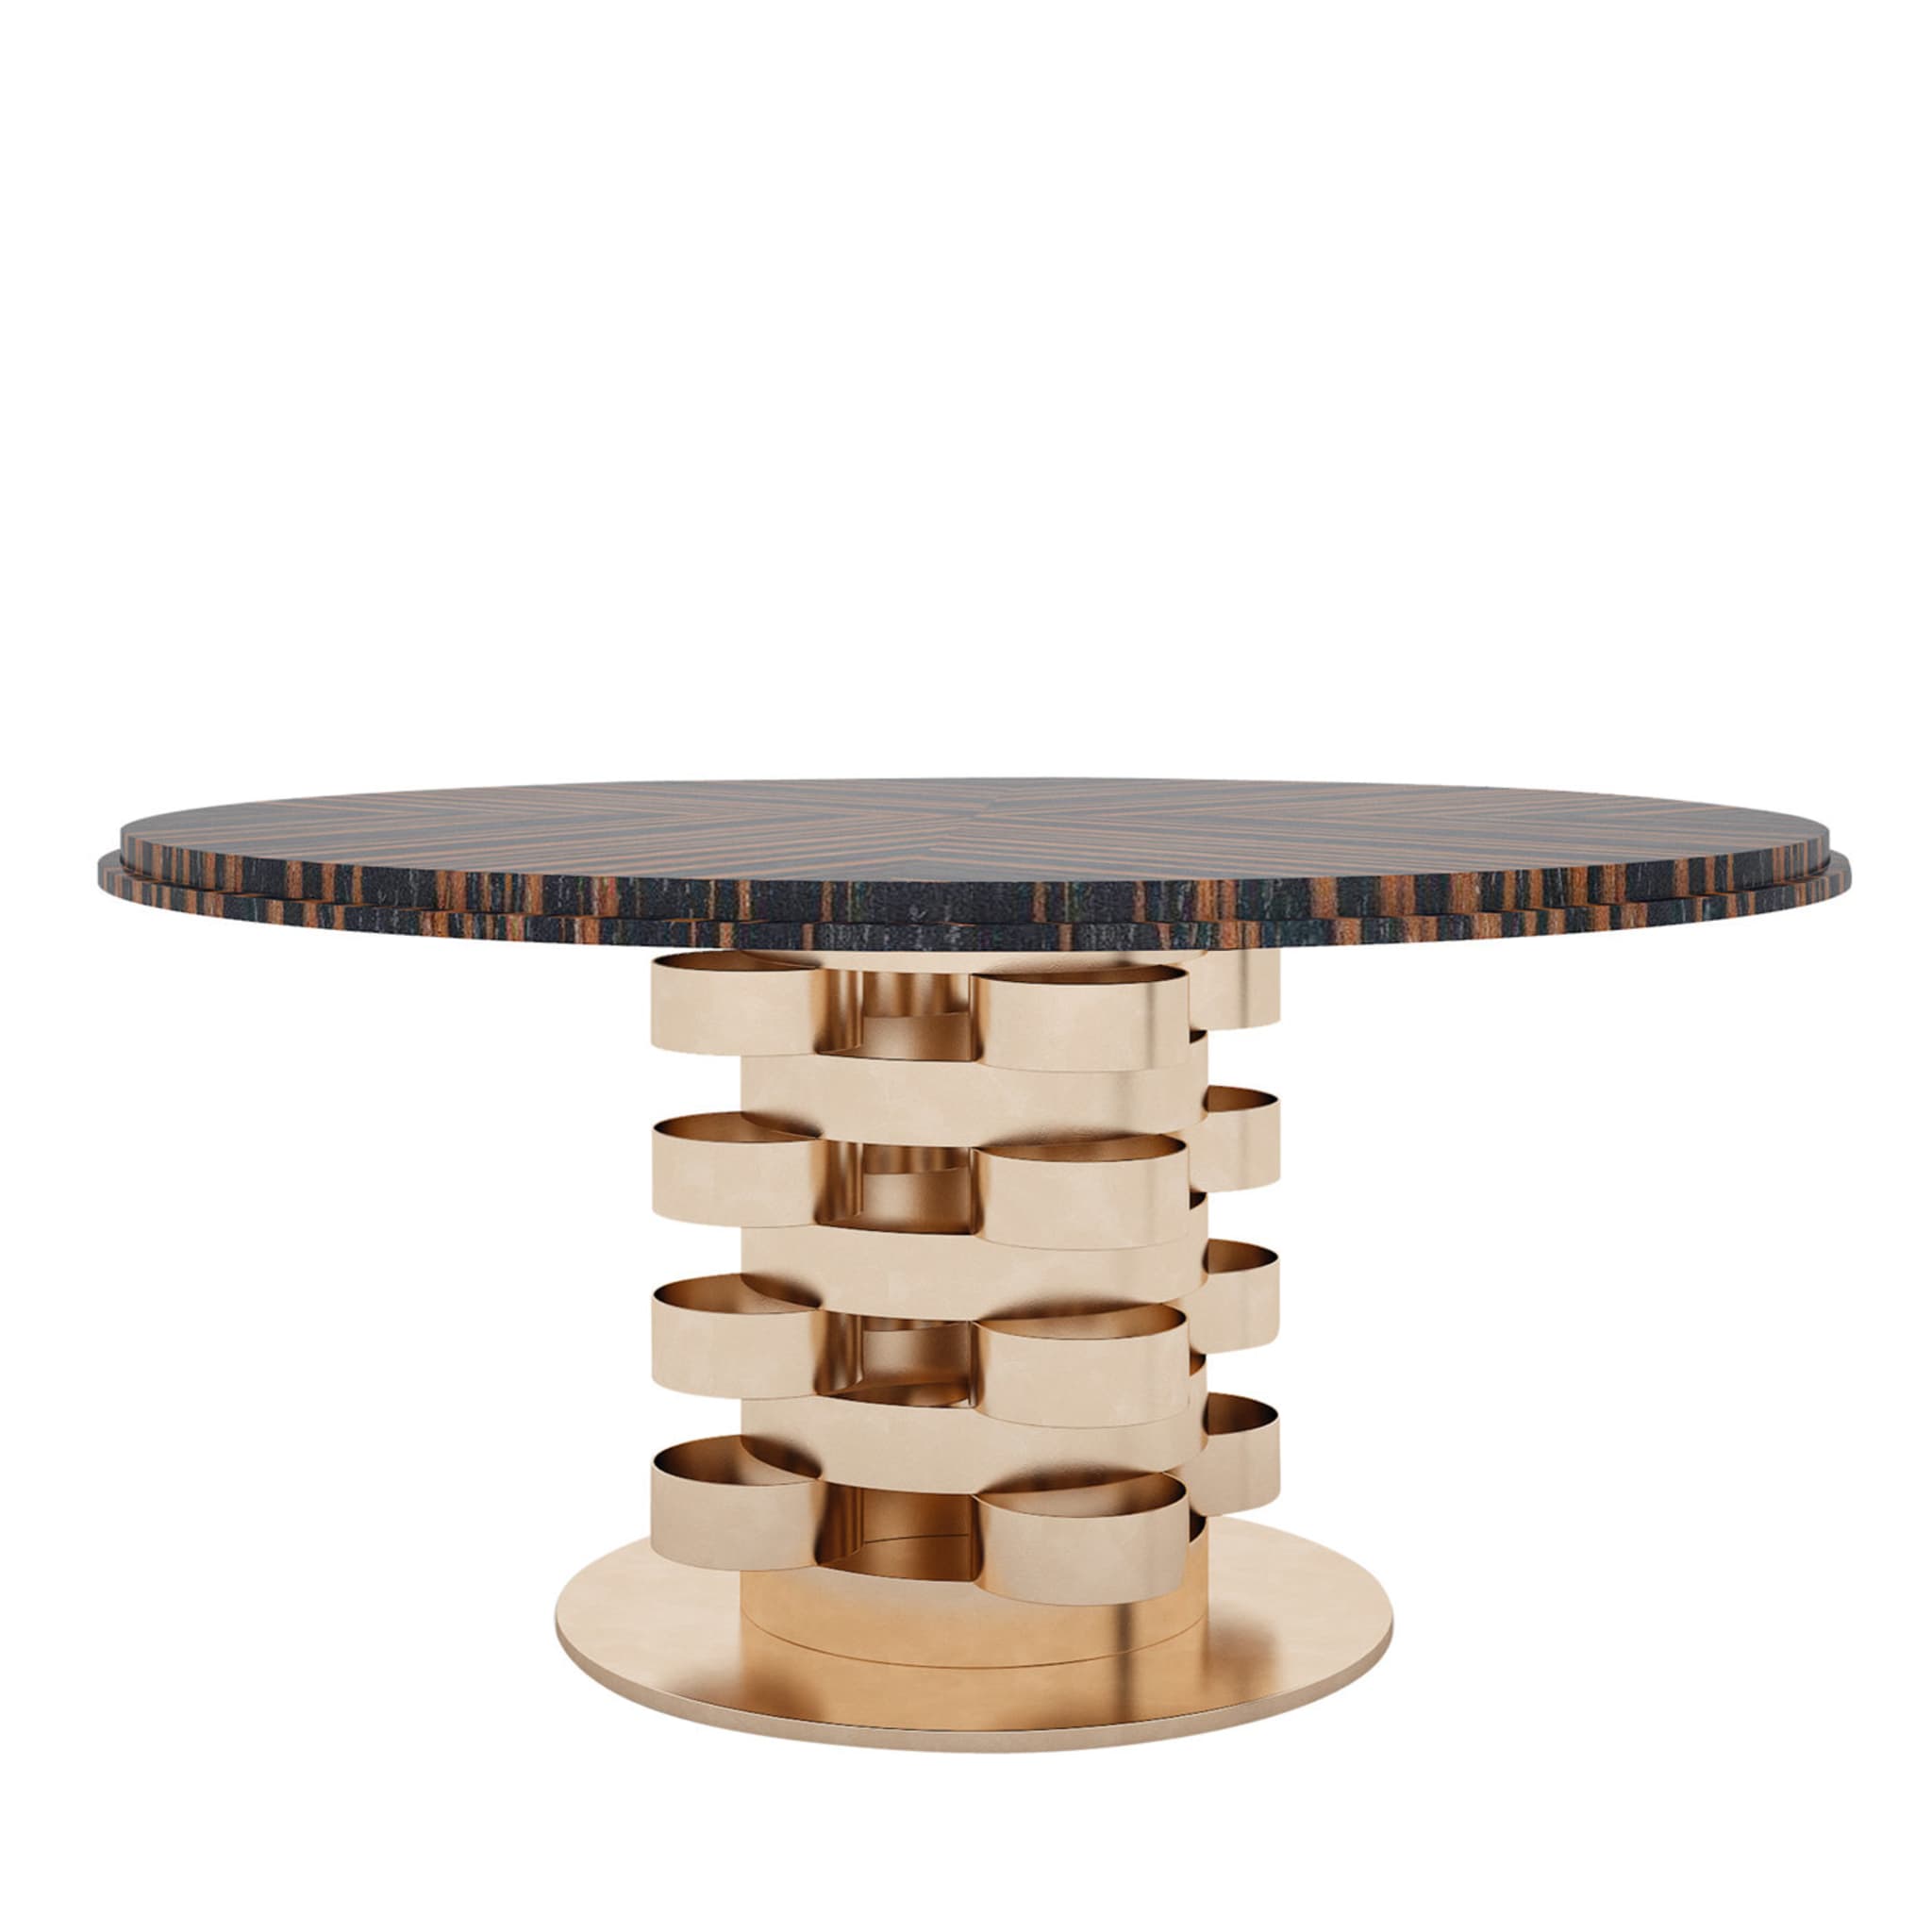 Apollo Dining Table by Giannella Ventura - Main view